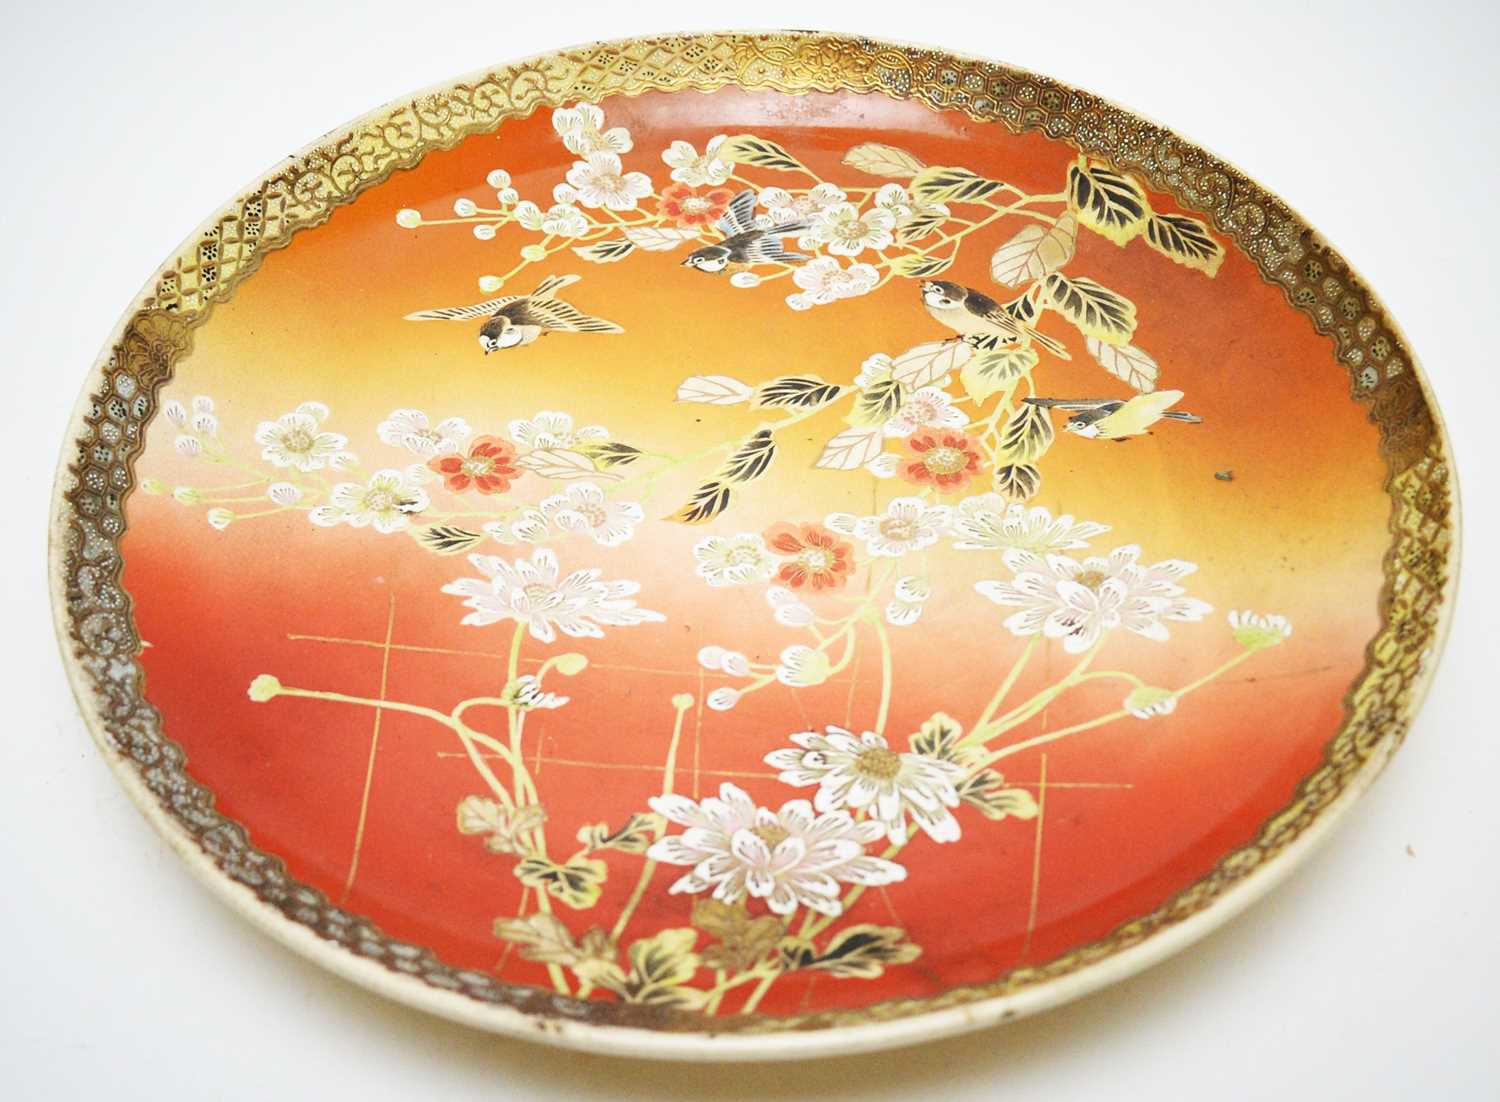 A large Japanese wall plaque